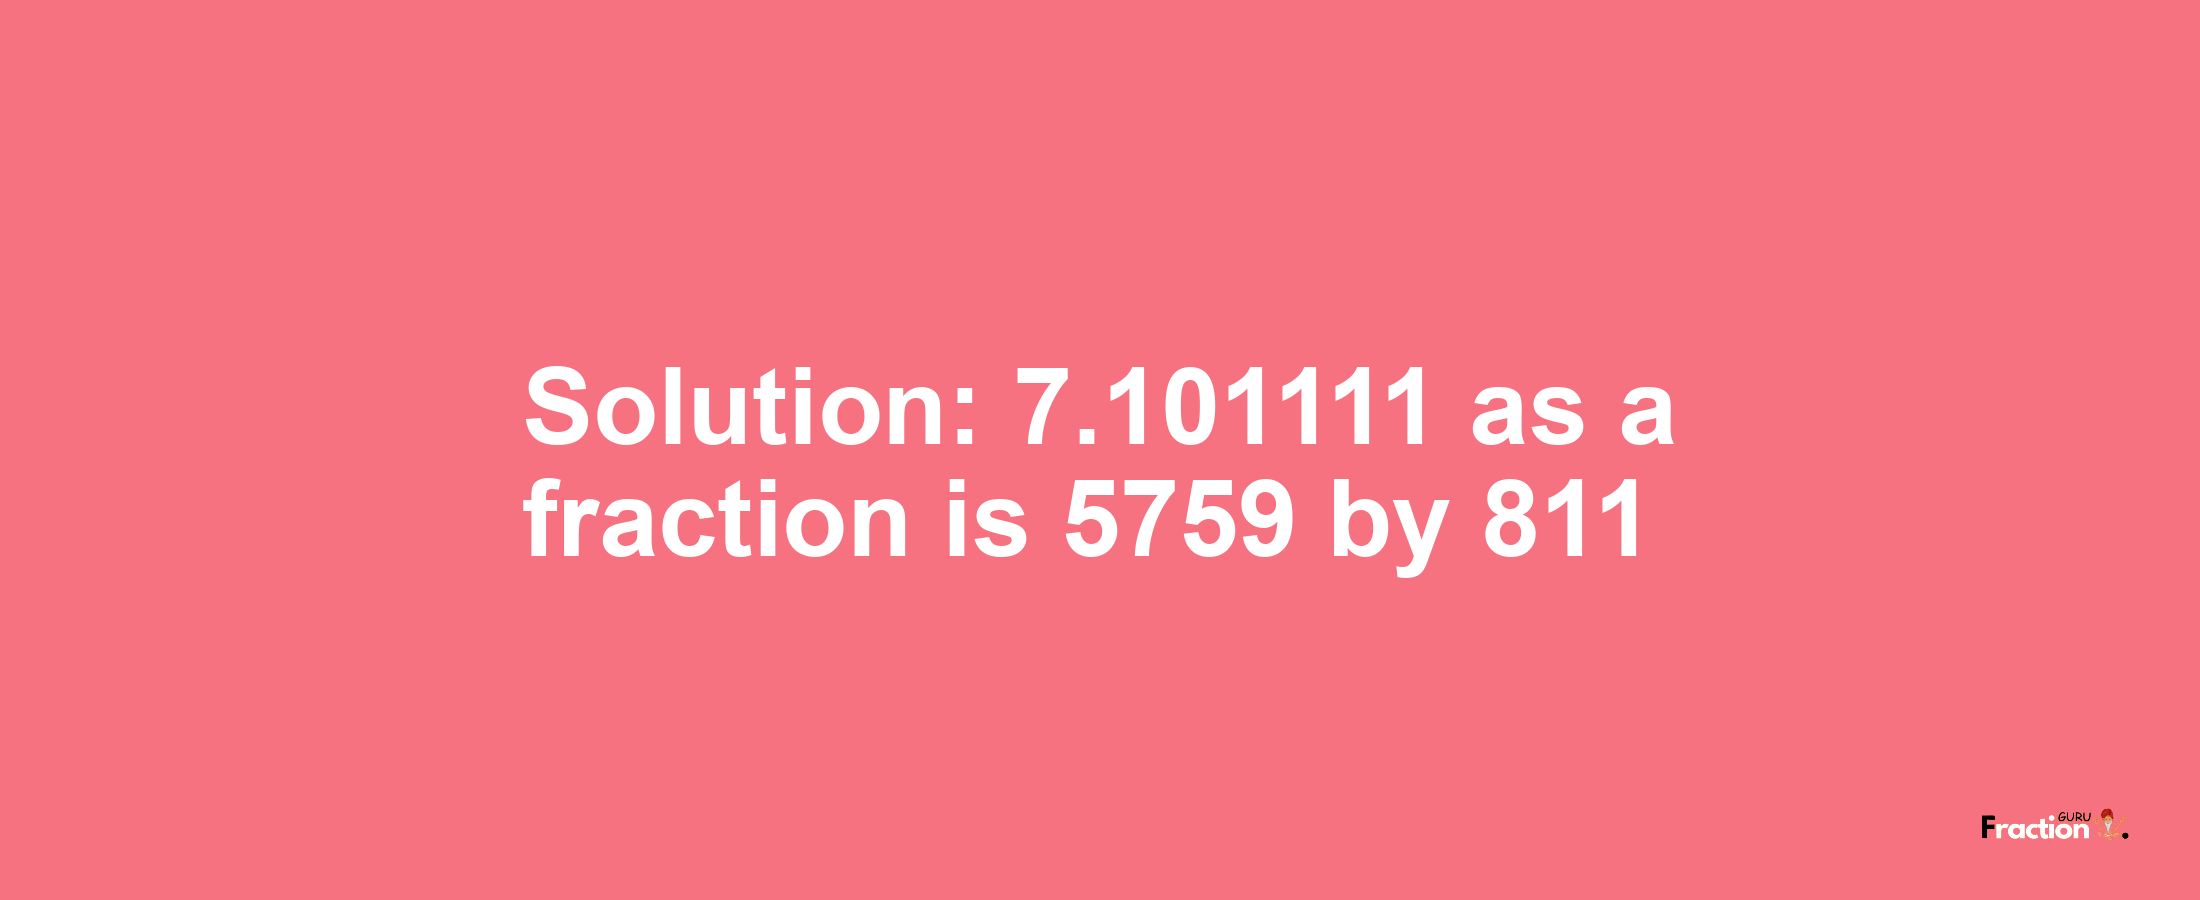 Solution:7.101111 as a fraction is 5759/811